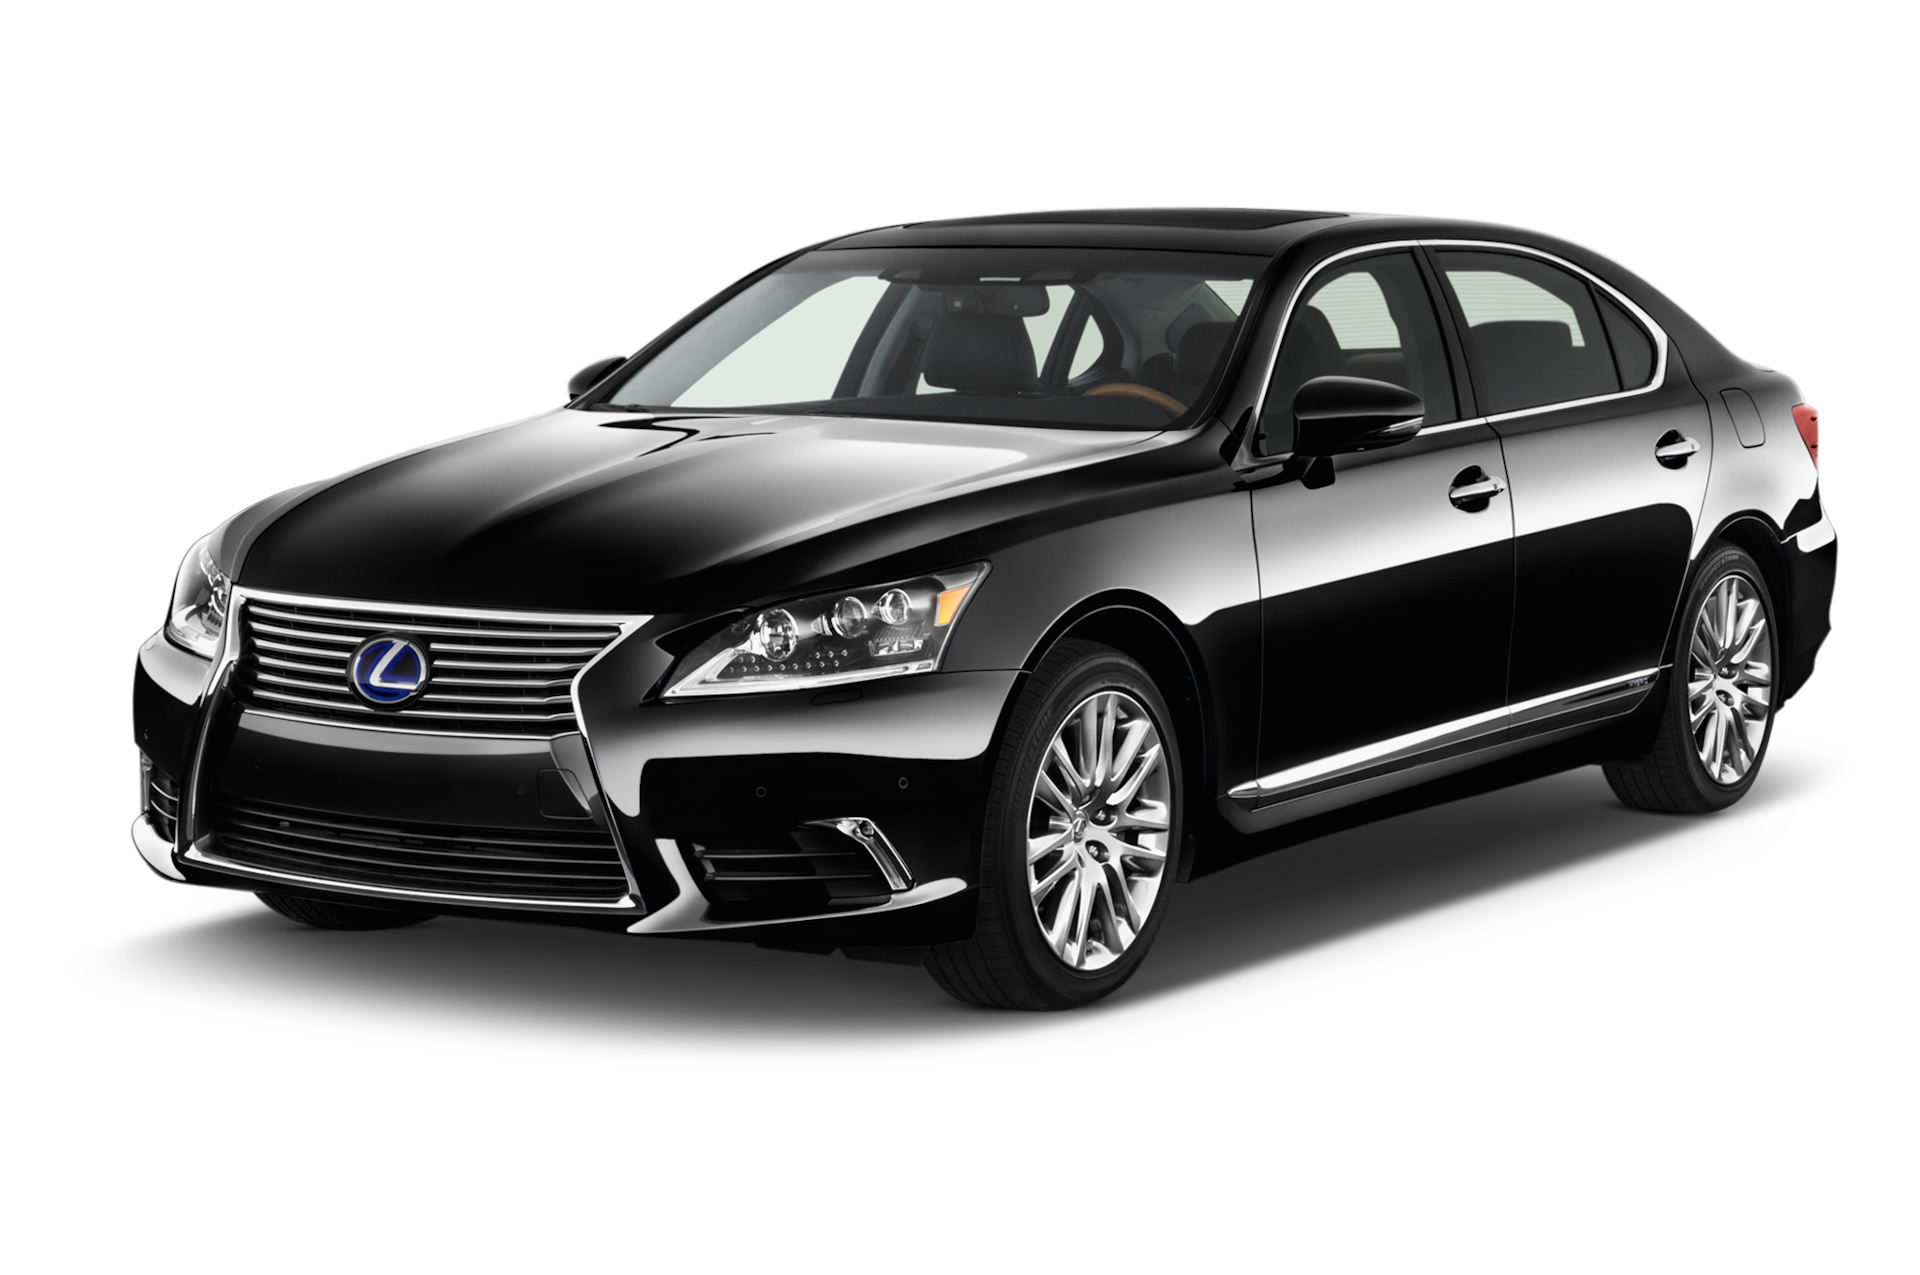 2016 Lexus LS600h Prices, Reviews, and Photos - MotorTrend